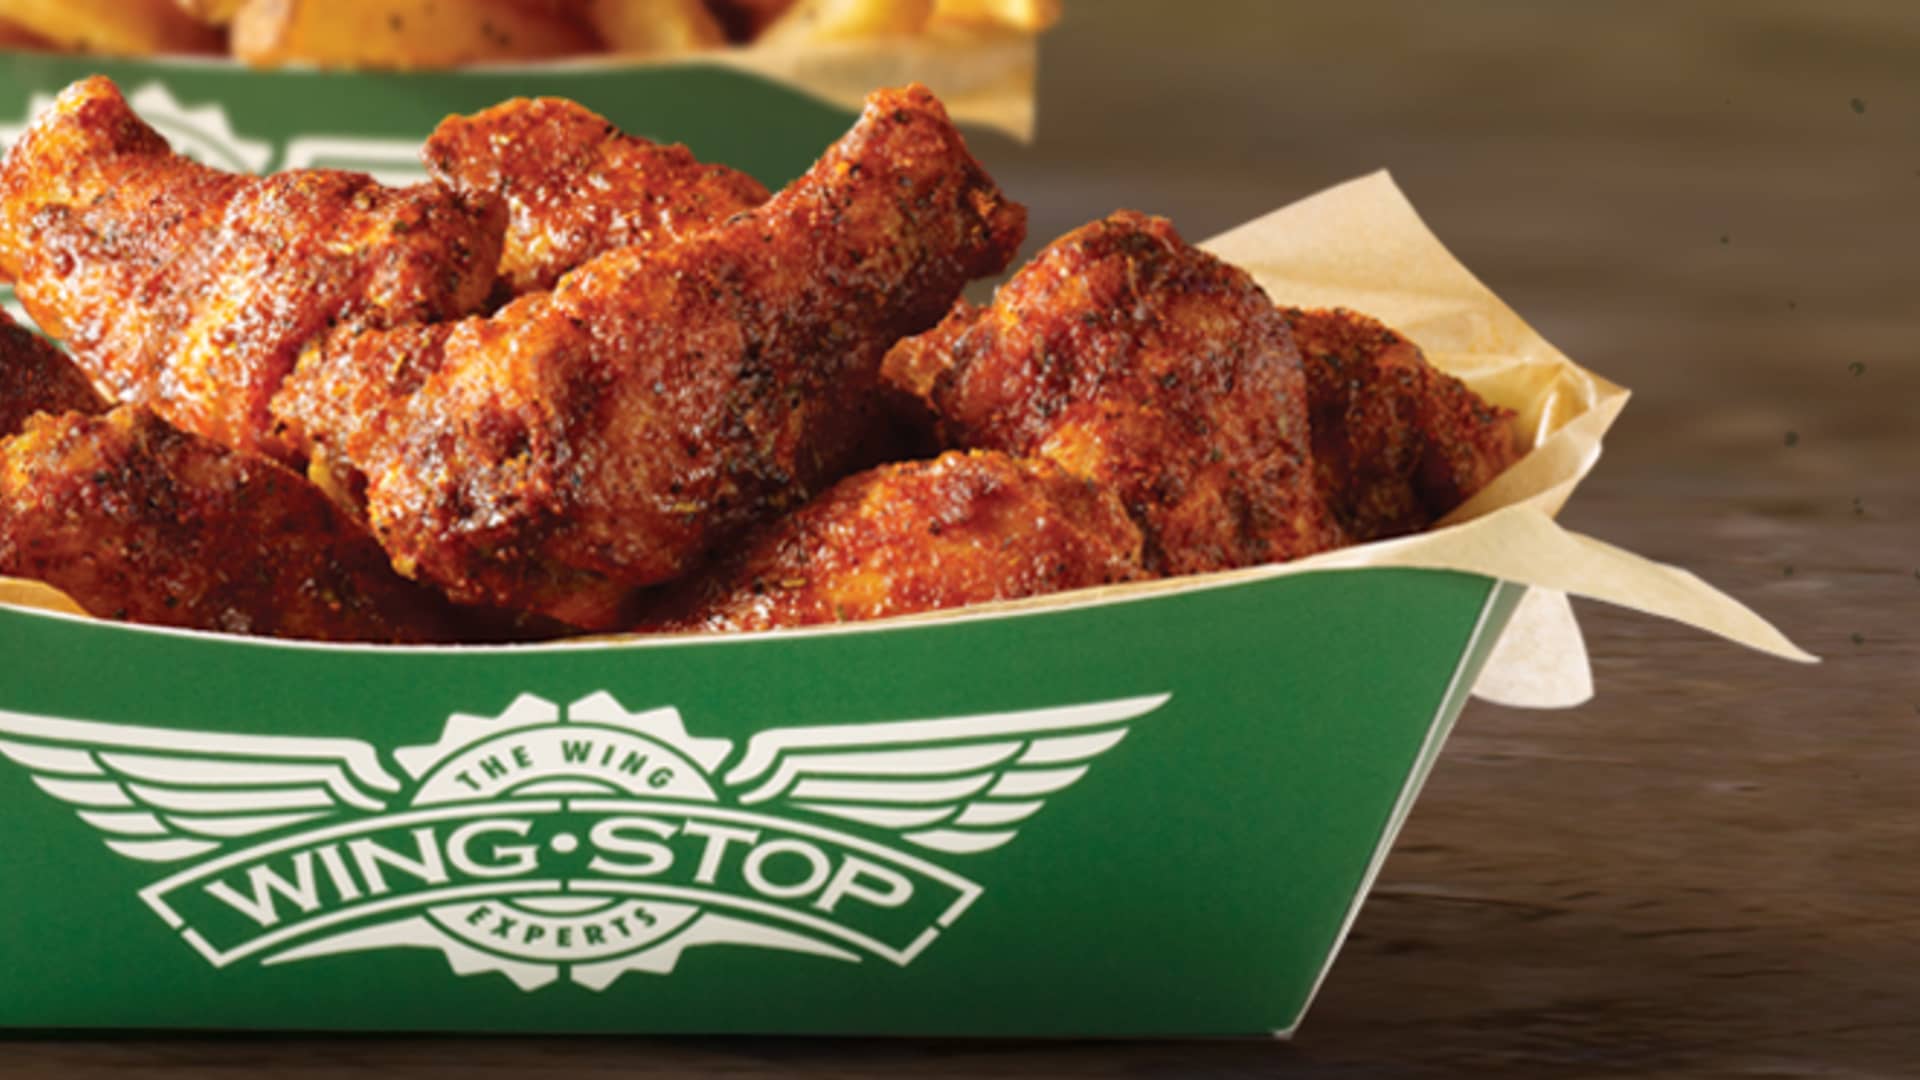 Wingstop is seeing ‘meaningful deflation’ in chicken wings, CEO says